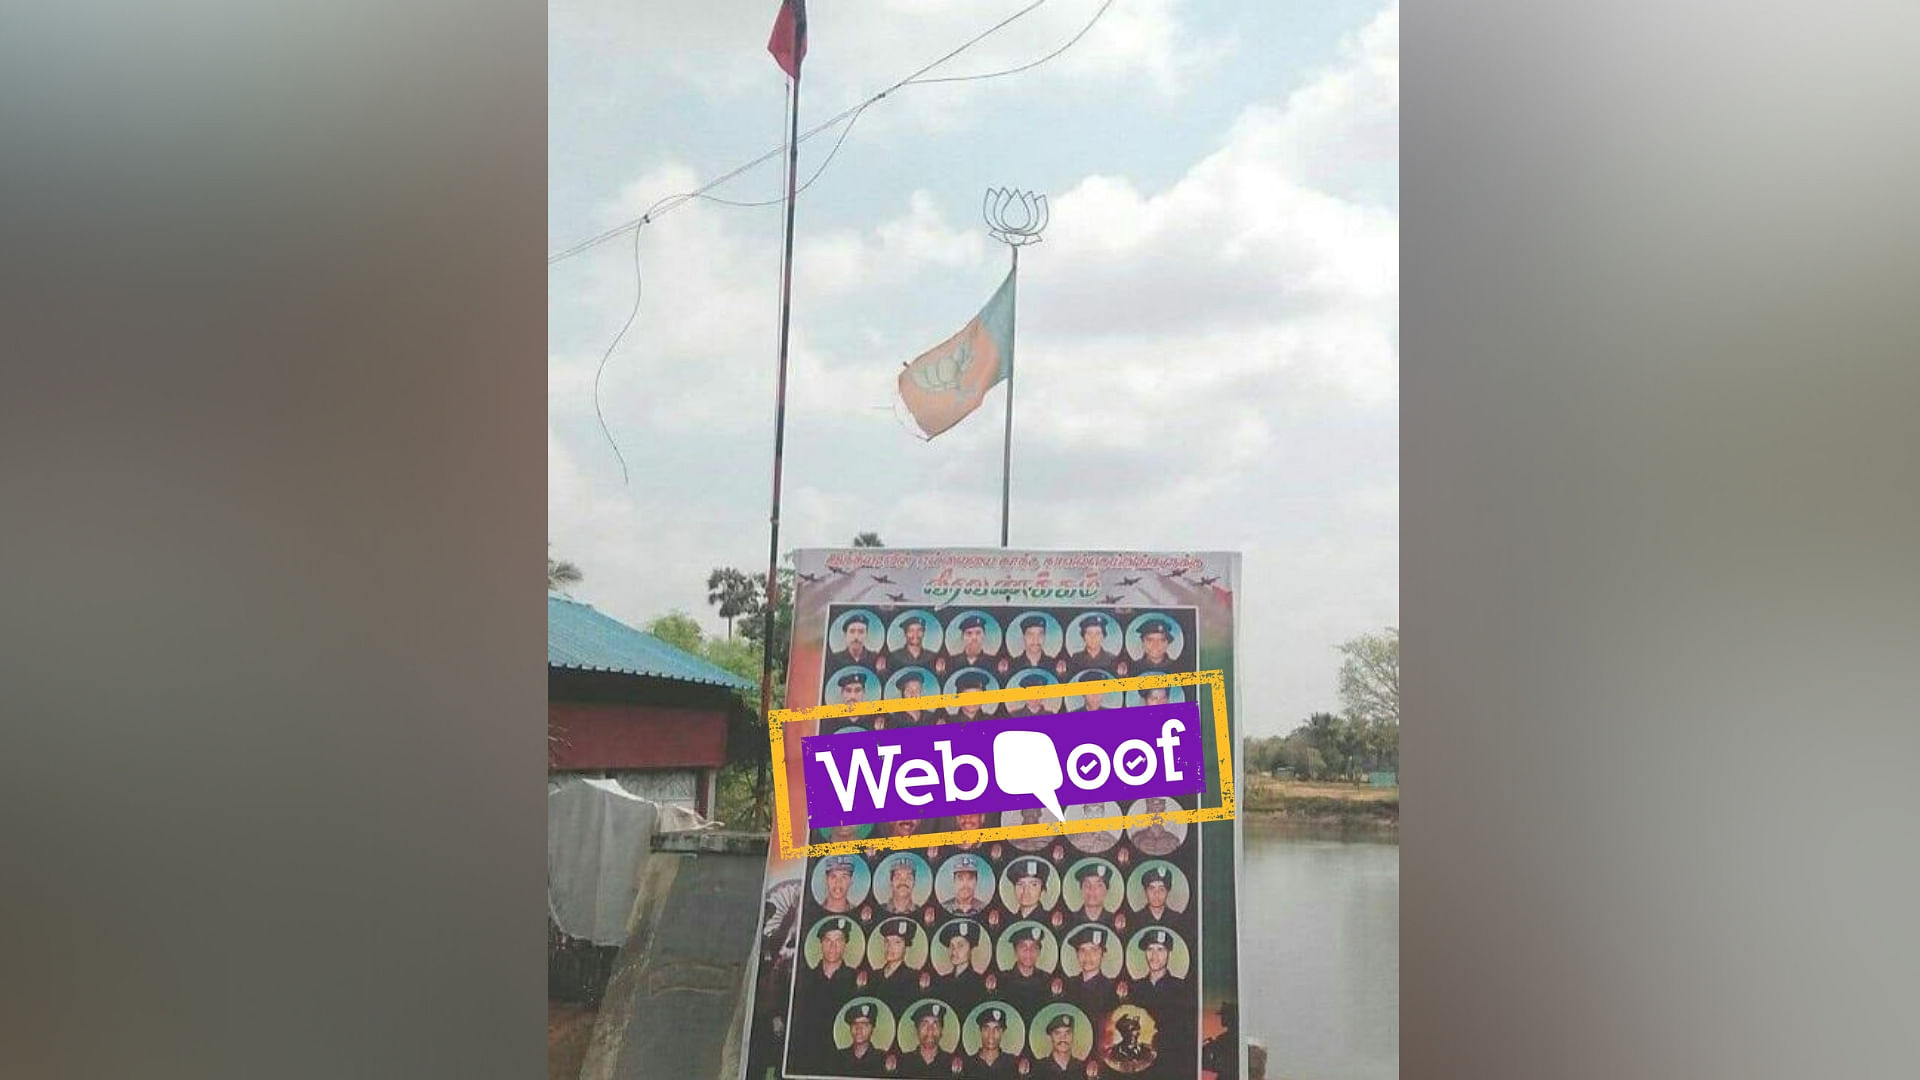 The poster has also been put up by a BJP unit in the state. However, the location could not be ascertained.